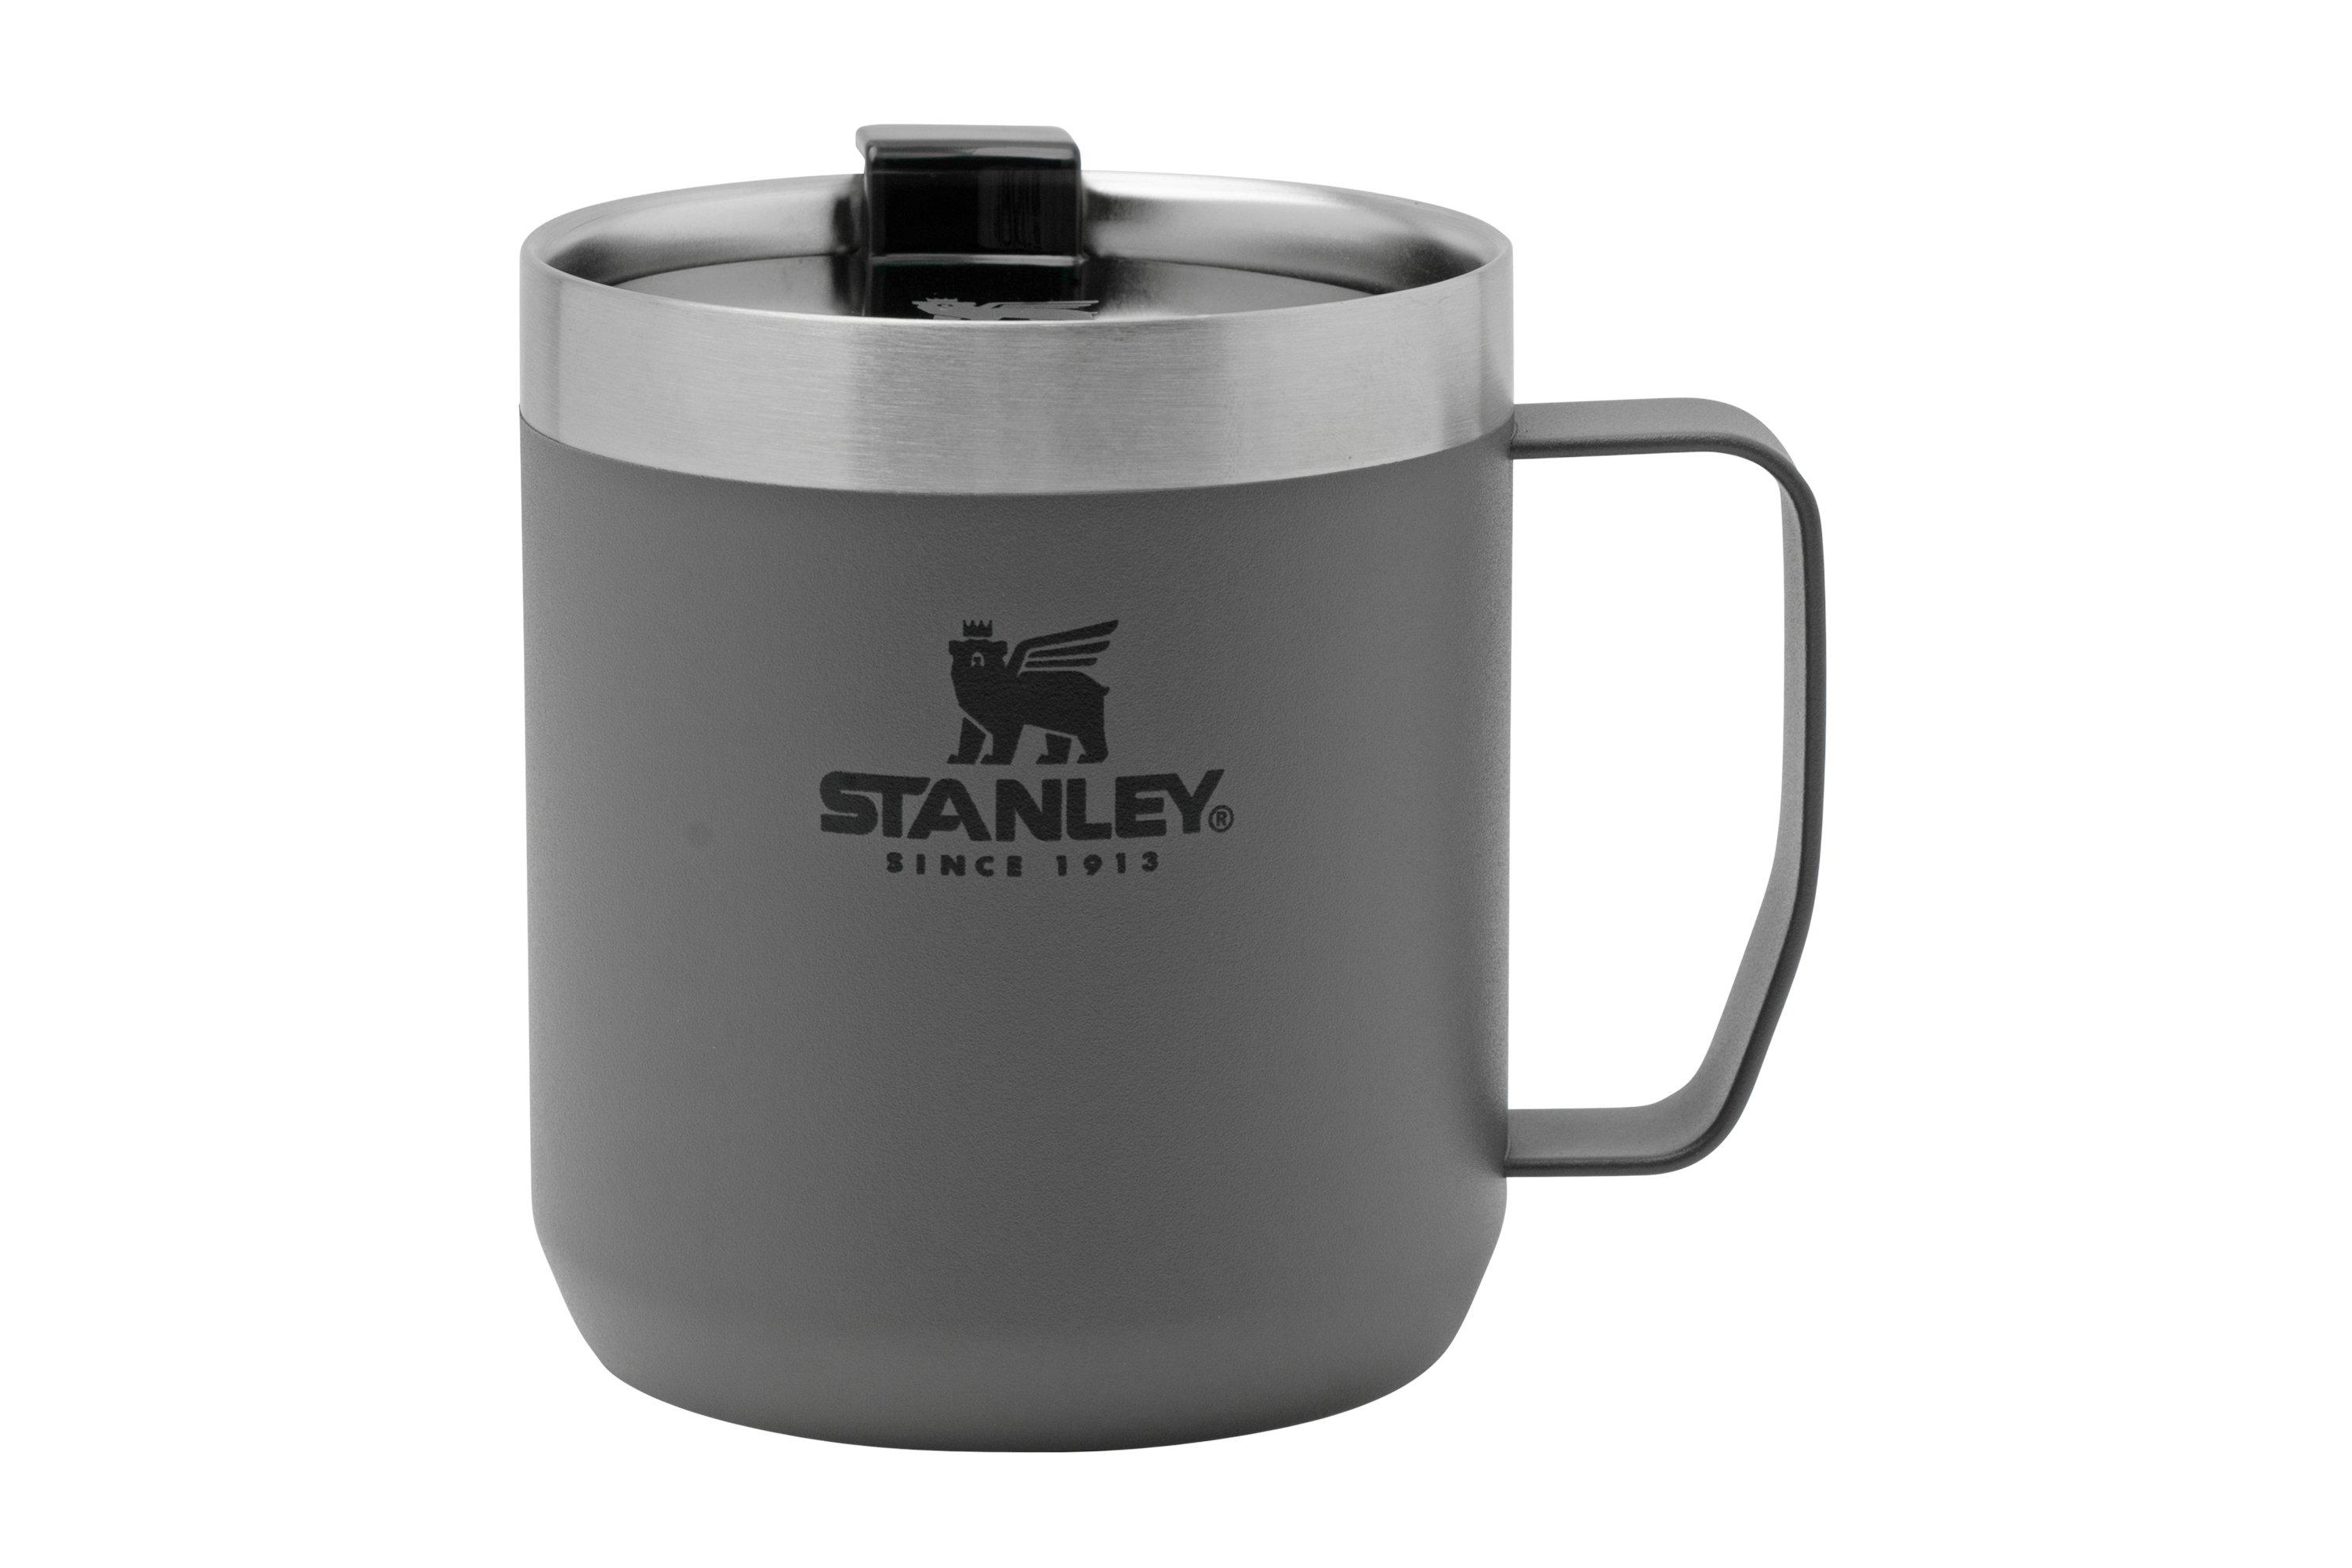 STANLEY THE LEGENDARY CAMP MUG 350ml Coffee Tea Cup Stay Warm For